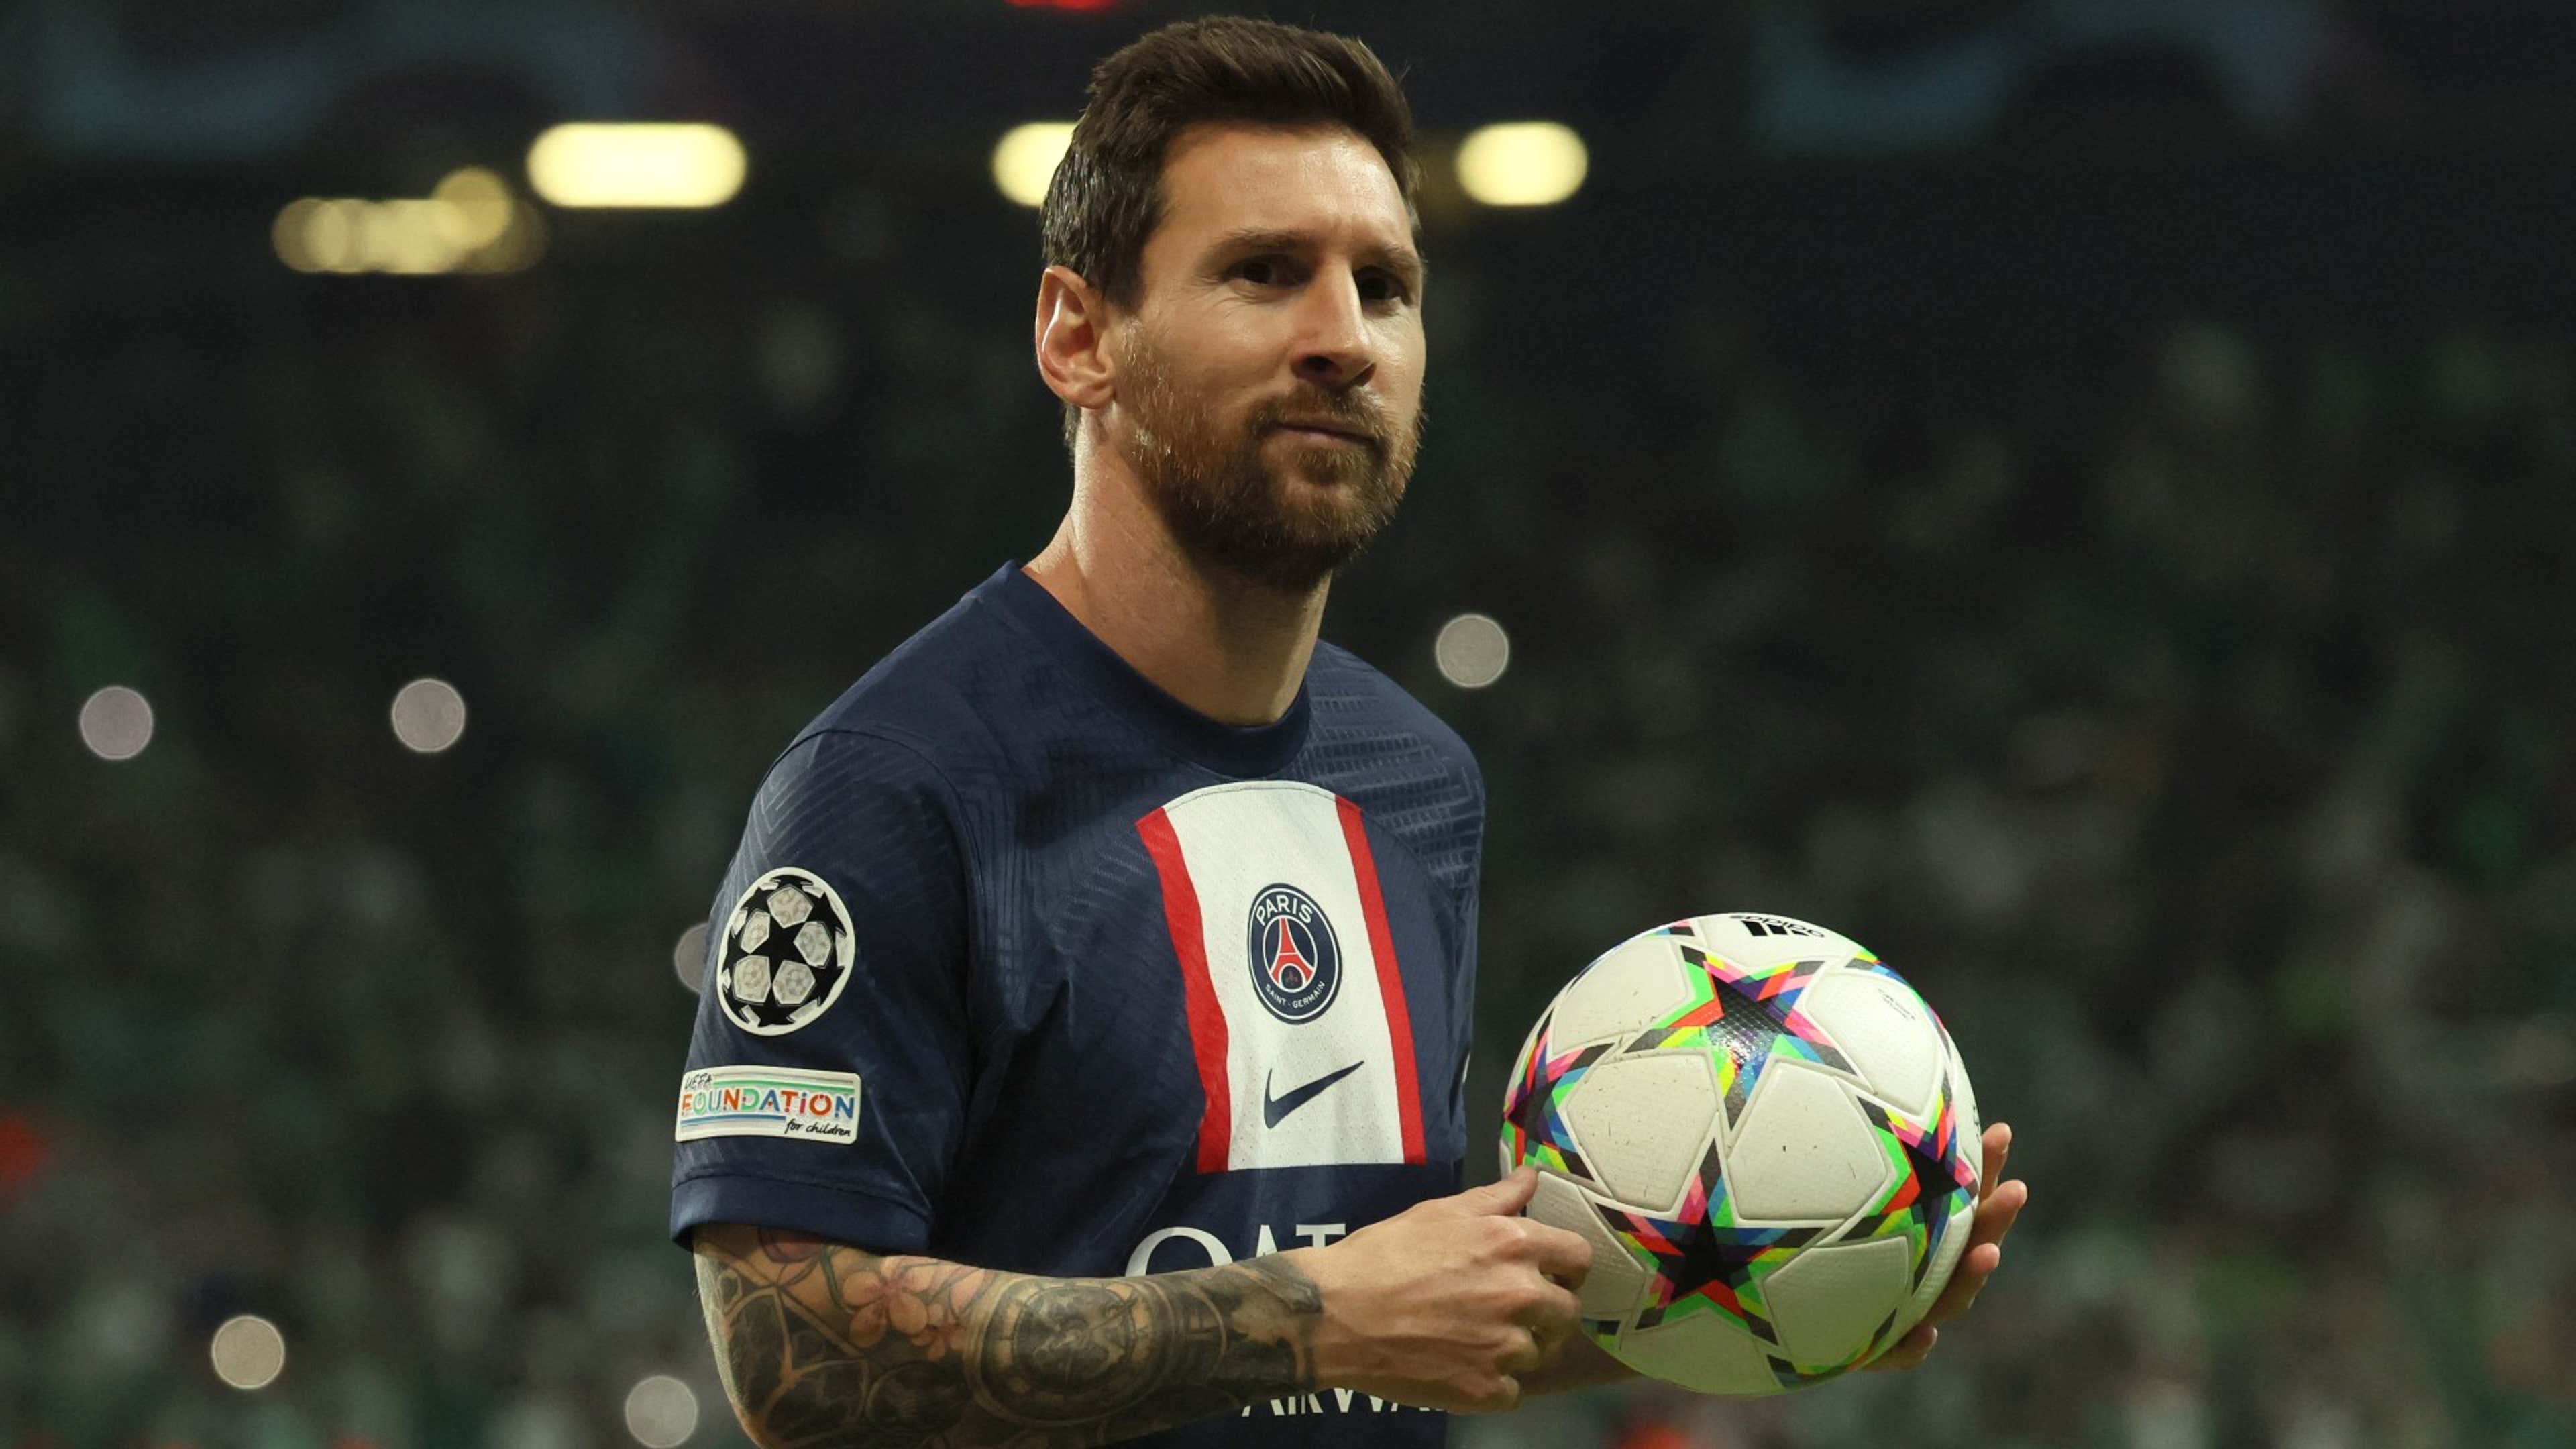 Messi surpasses Ronaldo as PSG star sets two new Champions League records  with strike against Maccabi Haifa  UK